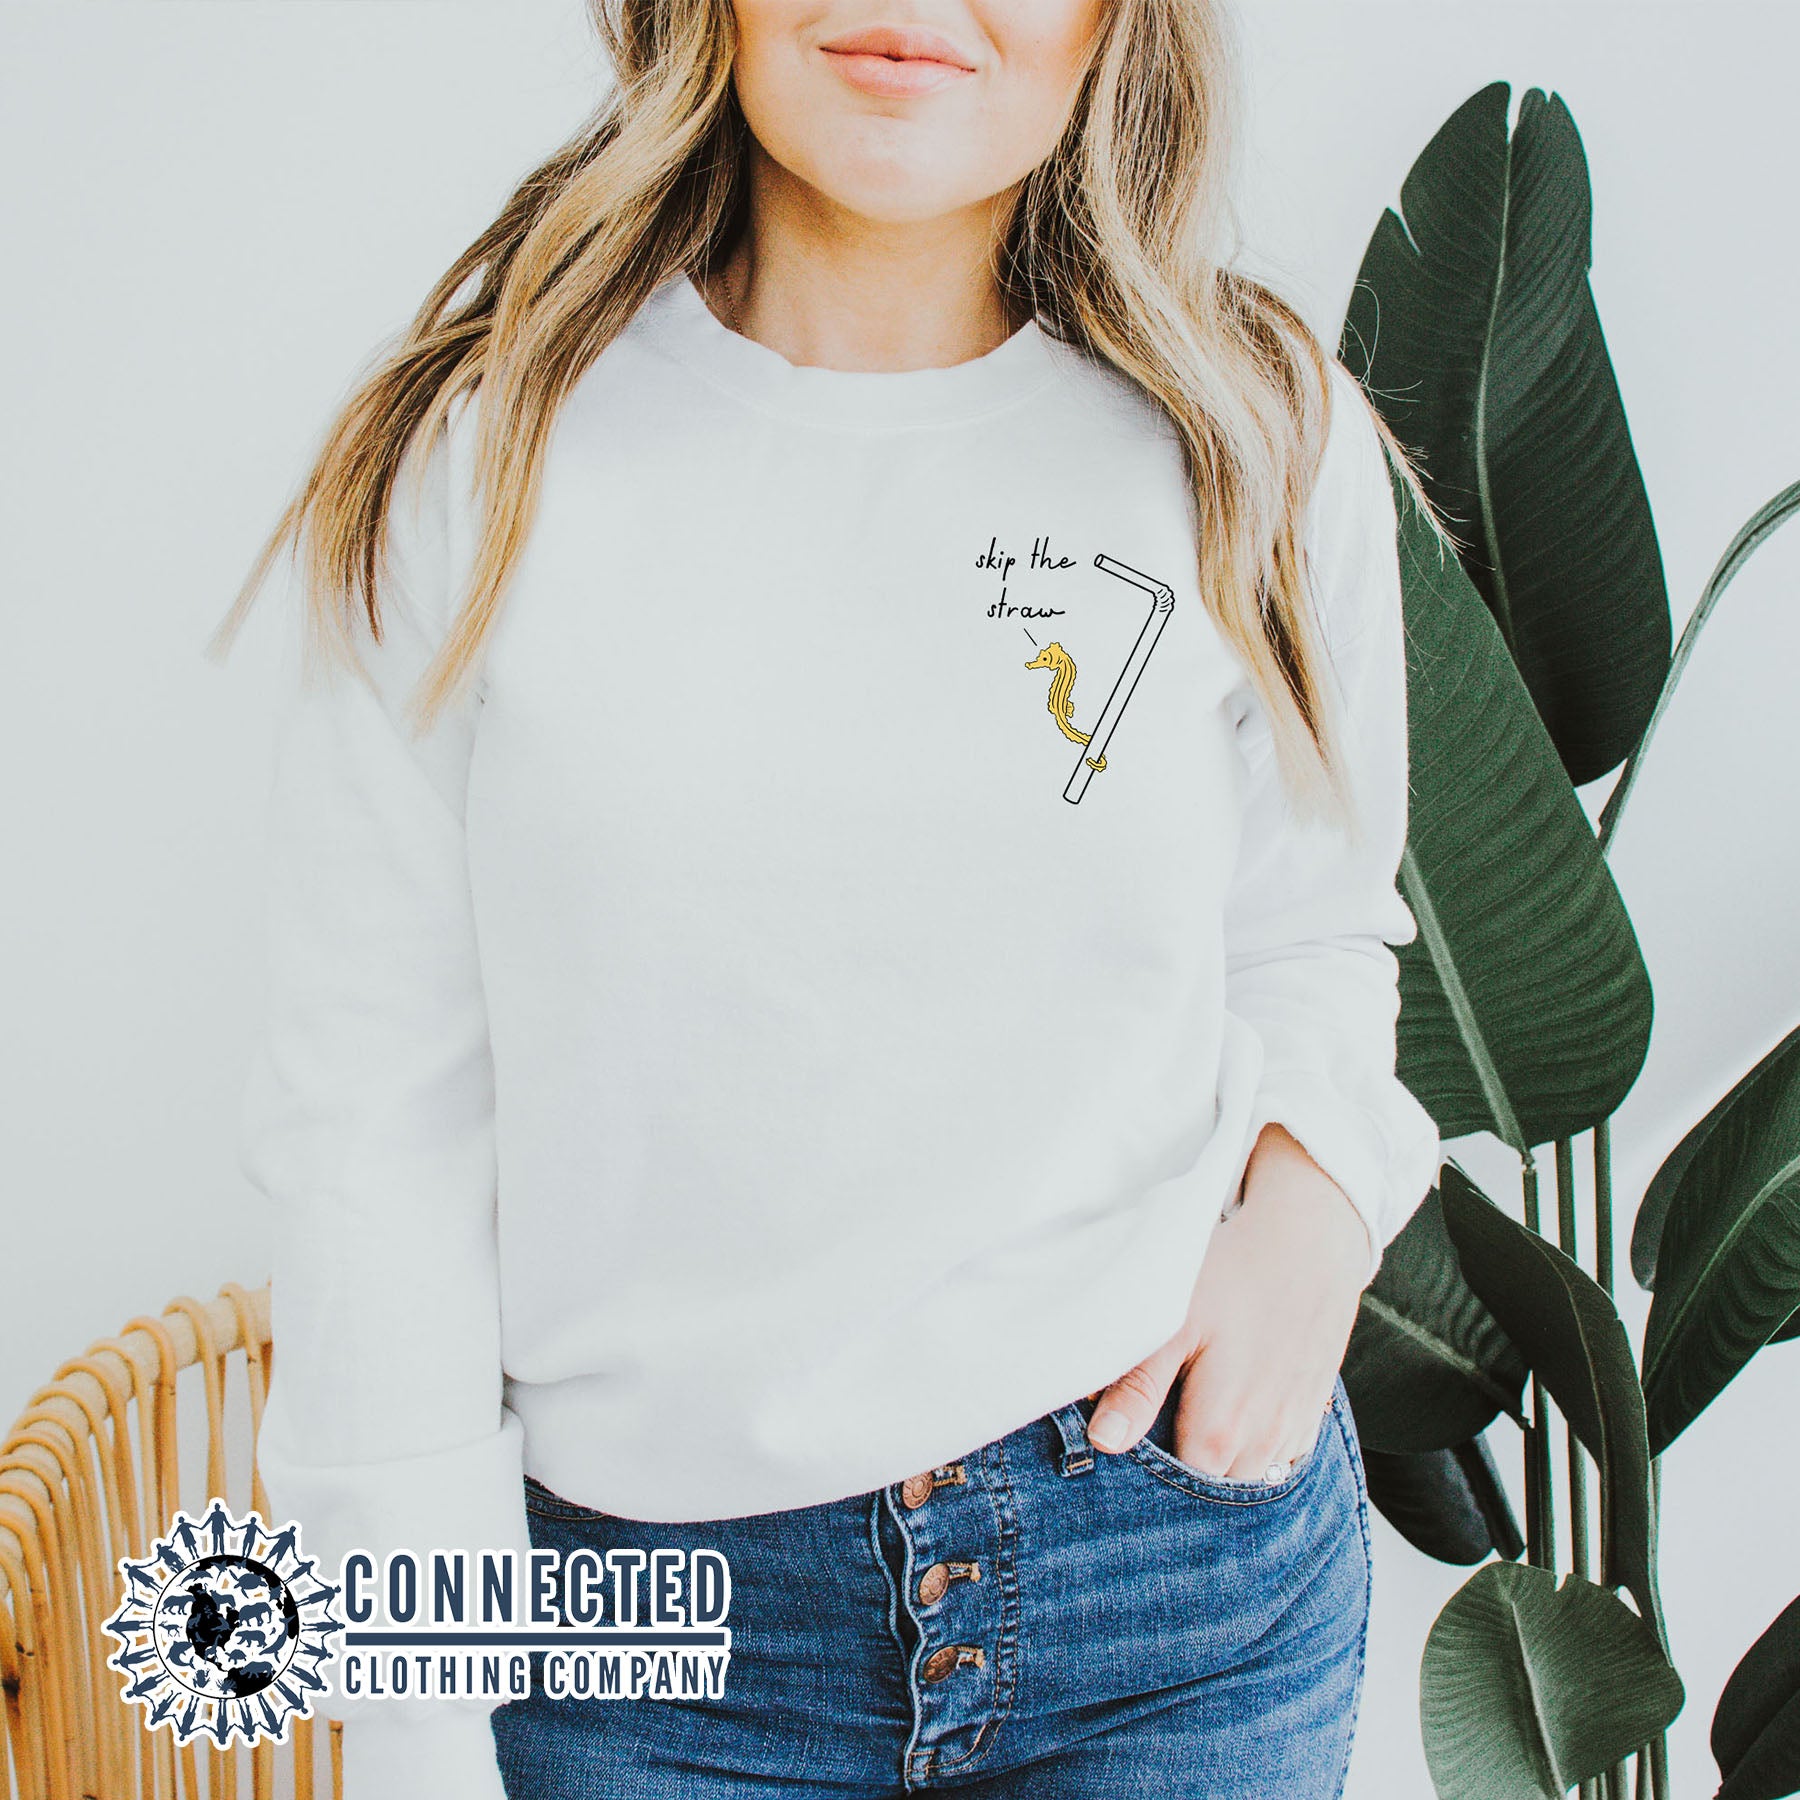 White Skip The Straw Seahorse Tee (Seahorse holding onto straw while saying skip the straw) - Connected Clothing Company - Ethically and Sustainably Made - 10% donated to Mission Blue ocean conservation